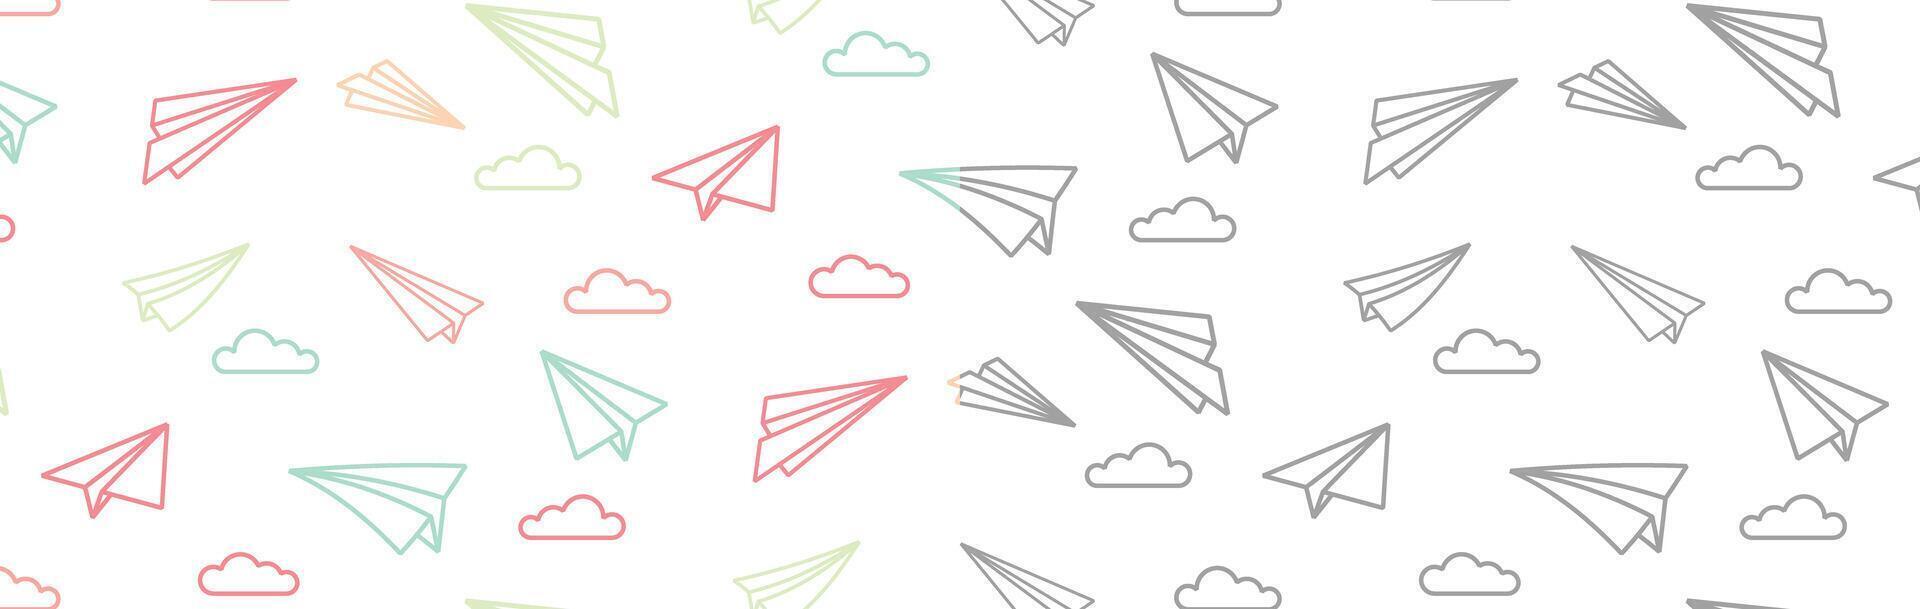 paper plane cute colorful seamless pattern background texture vector